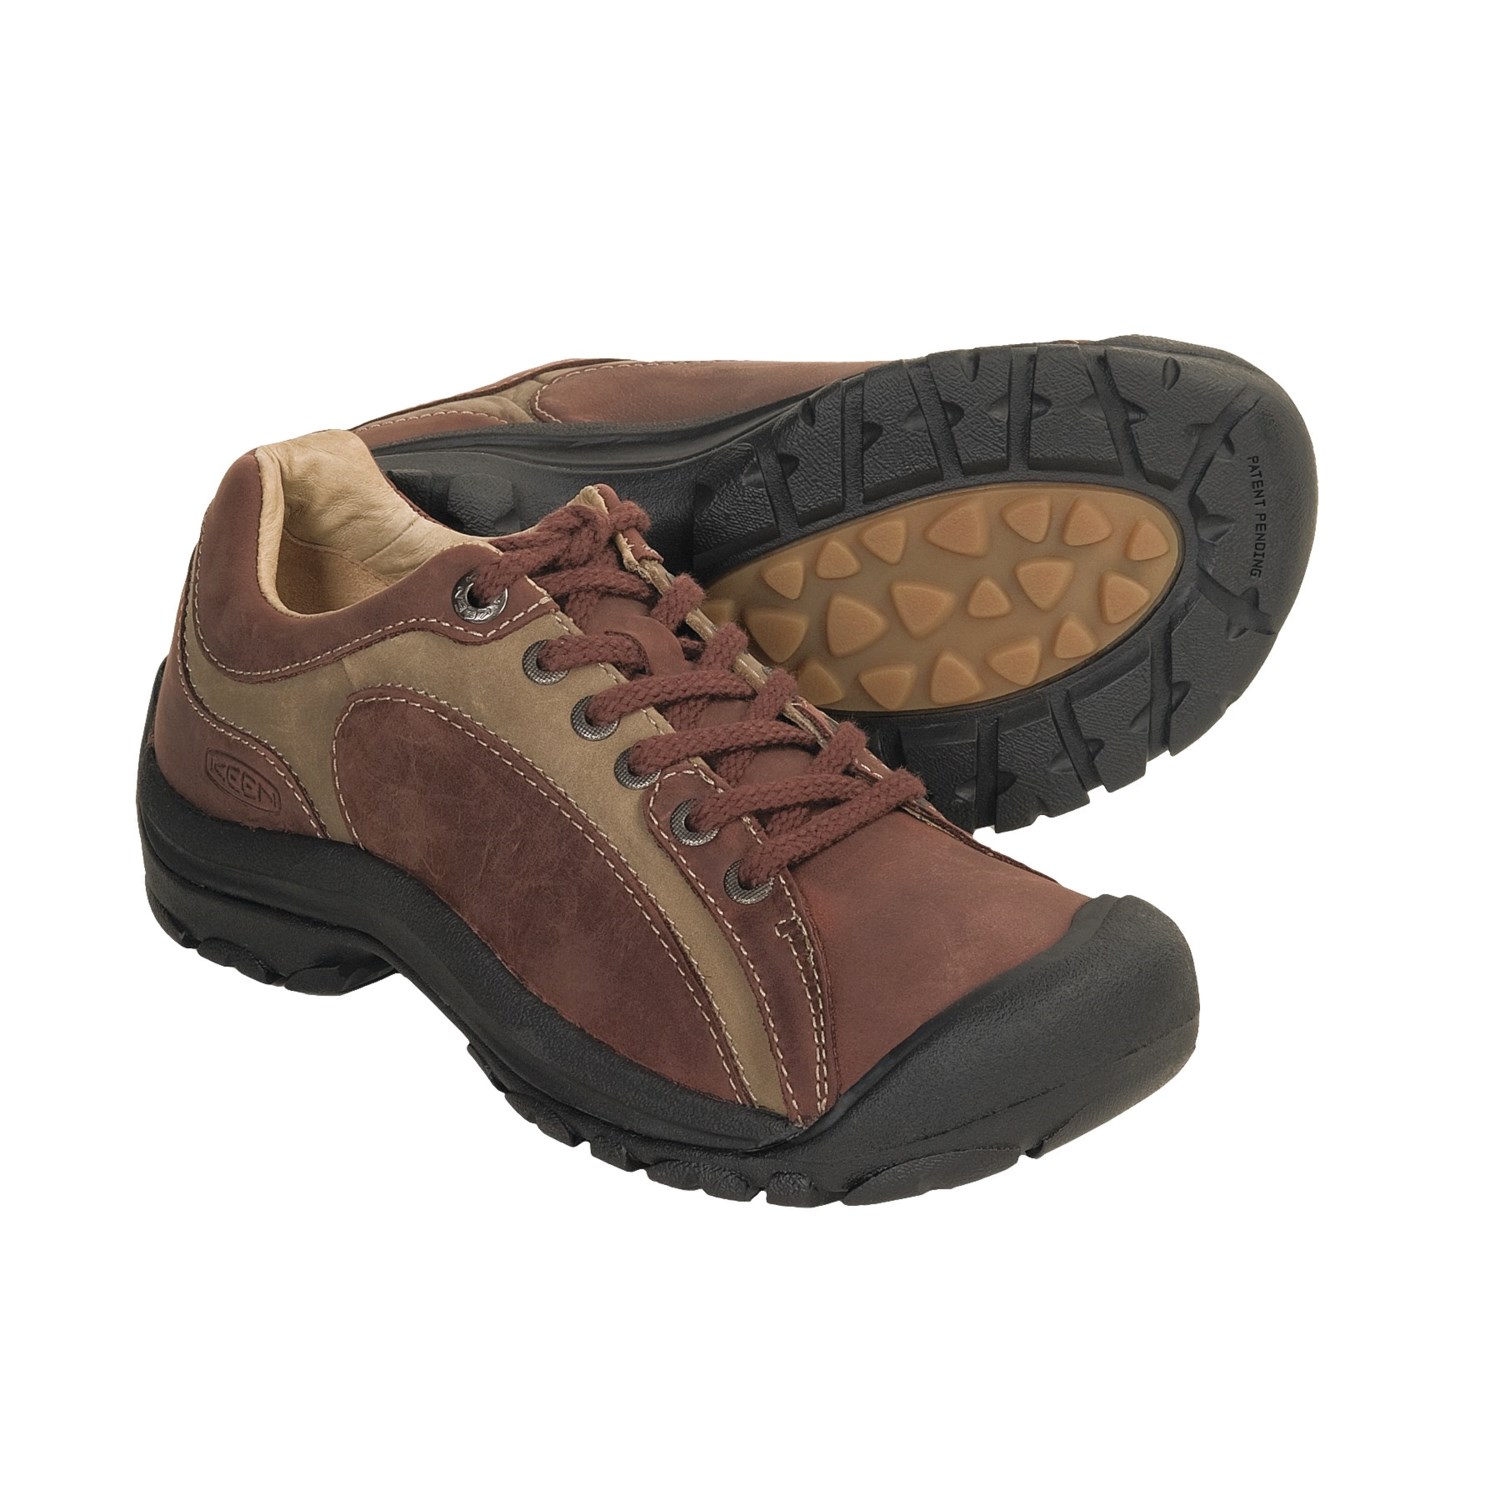 Keen Briggs II Shoes (For Women) - Save 54%